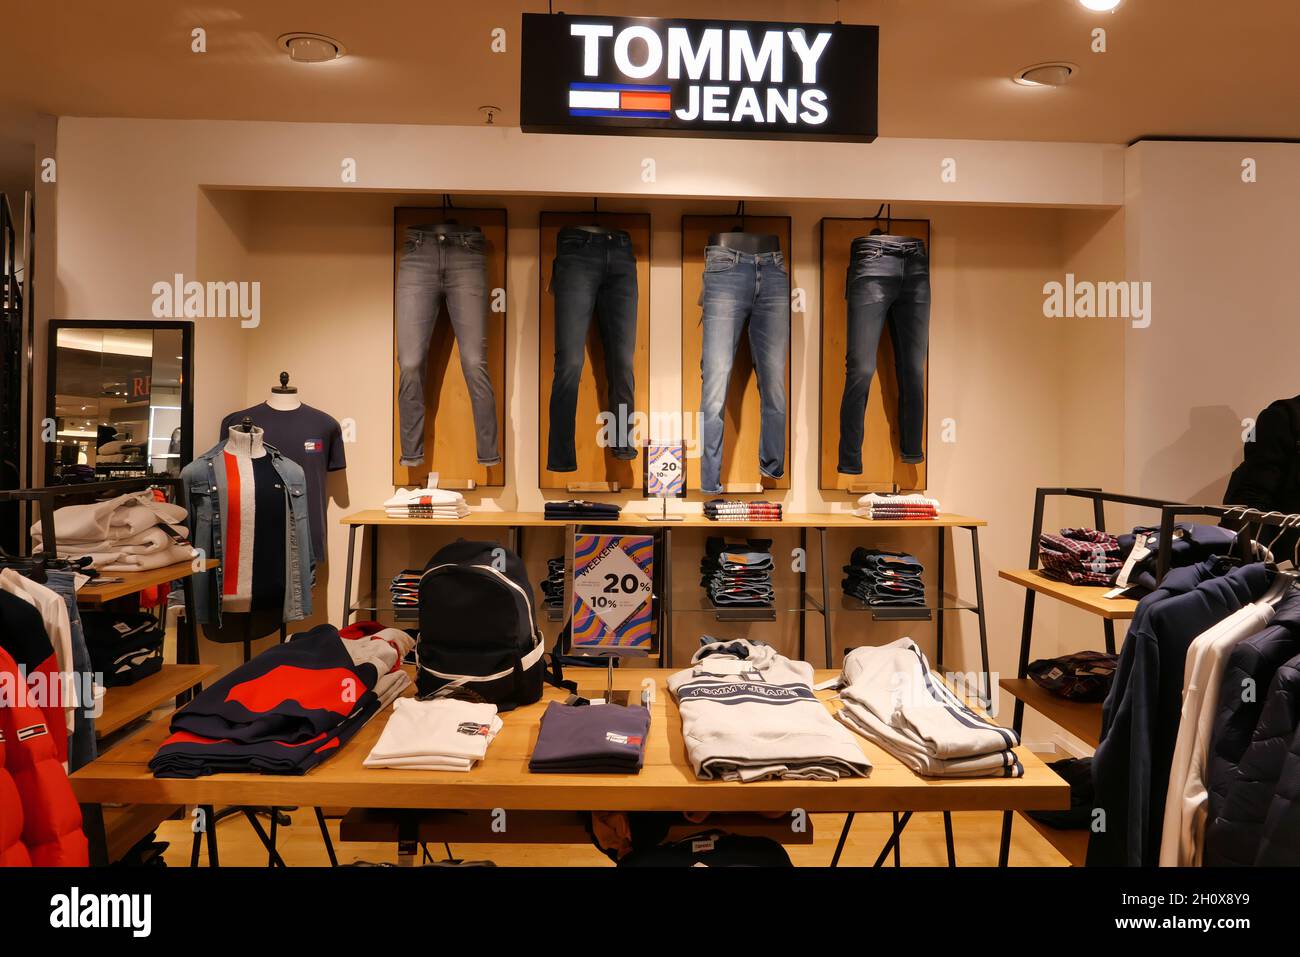 inhoudsopgave gevolgtrekking actrice TOMMY JEANS CLOTHING ON DISPLAY INSIDE THE FASHION STORE Stock Photo - Alamy